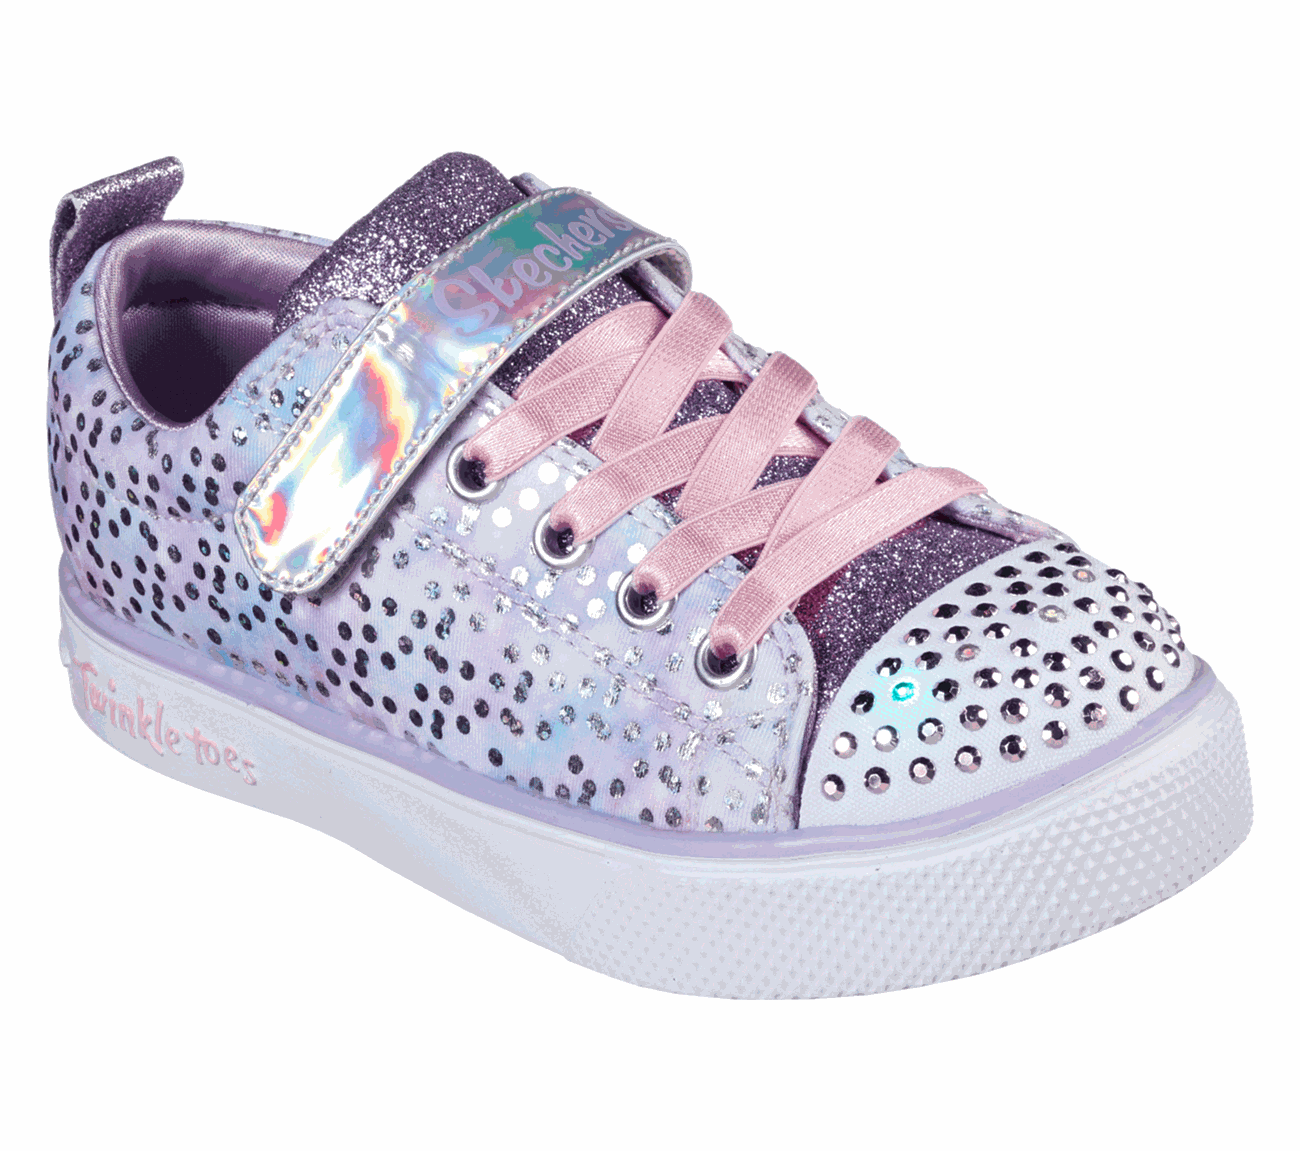 skechers magical unicorn collection